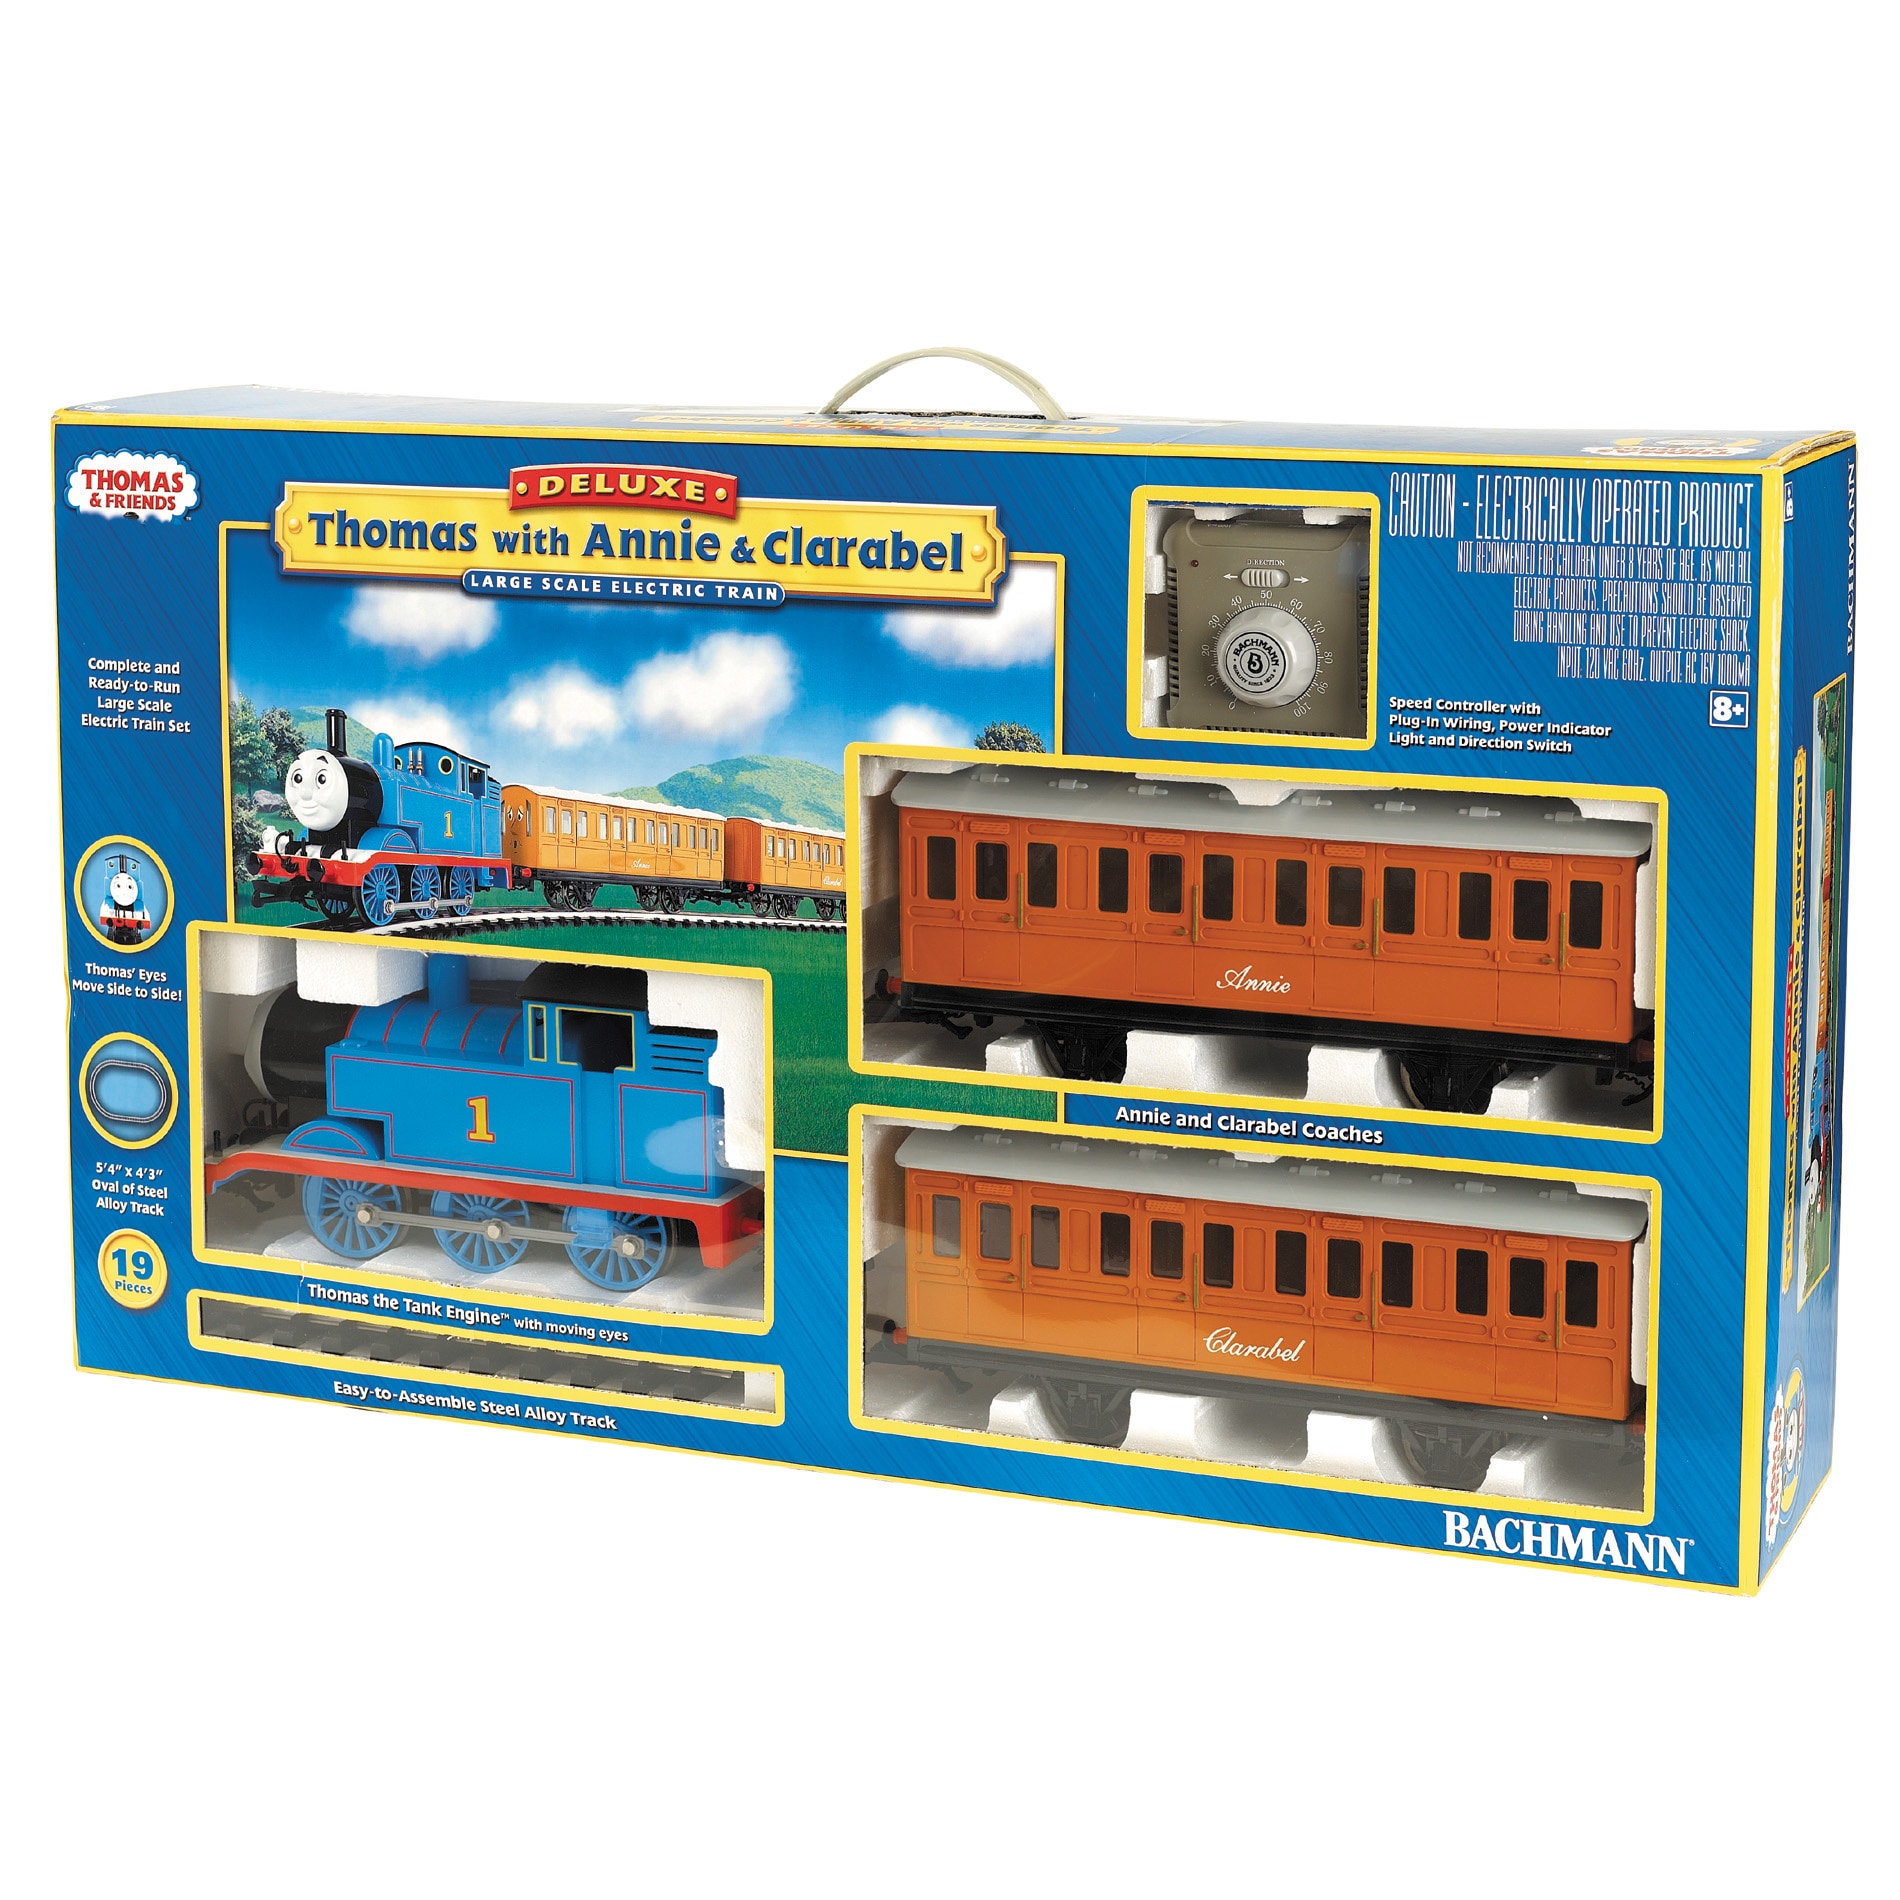 Bachmann G Scale Thomas and Friends Large Scale Train Set - 13922799 